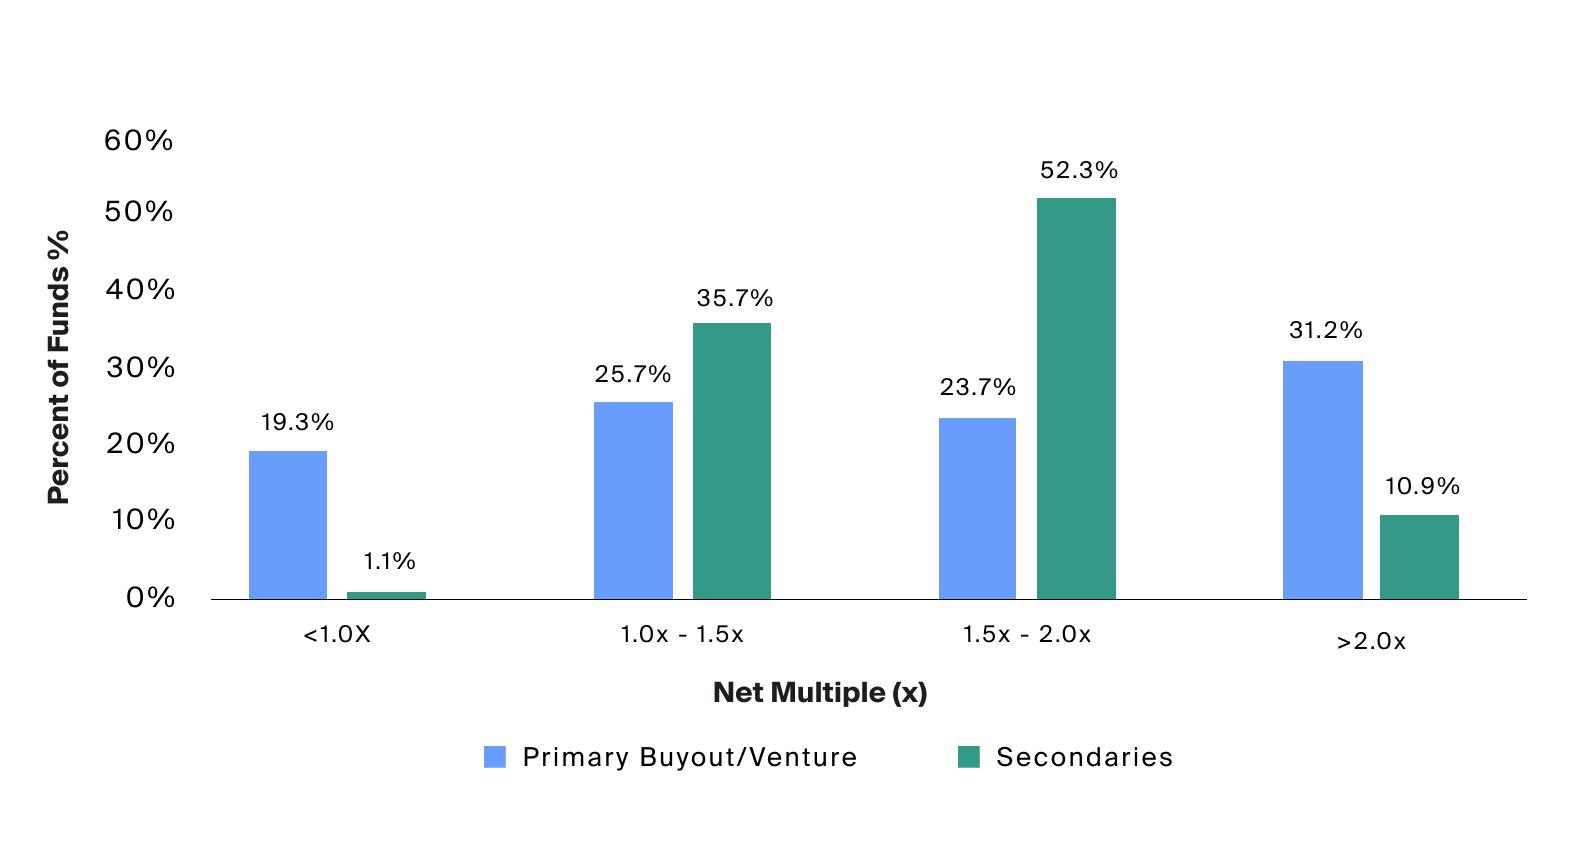 Fewer secondaries funds have lost investor capital and have generated a narrower range of returns when compared to primary buyout and venture funds